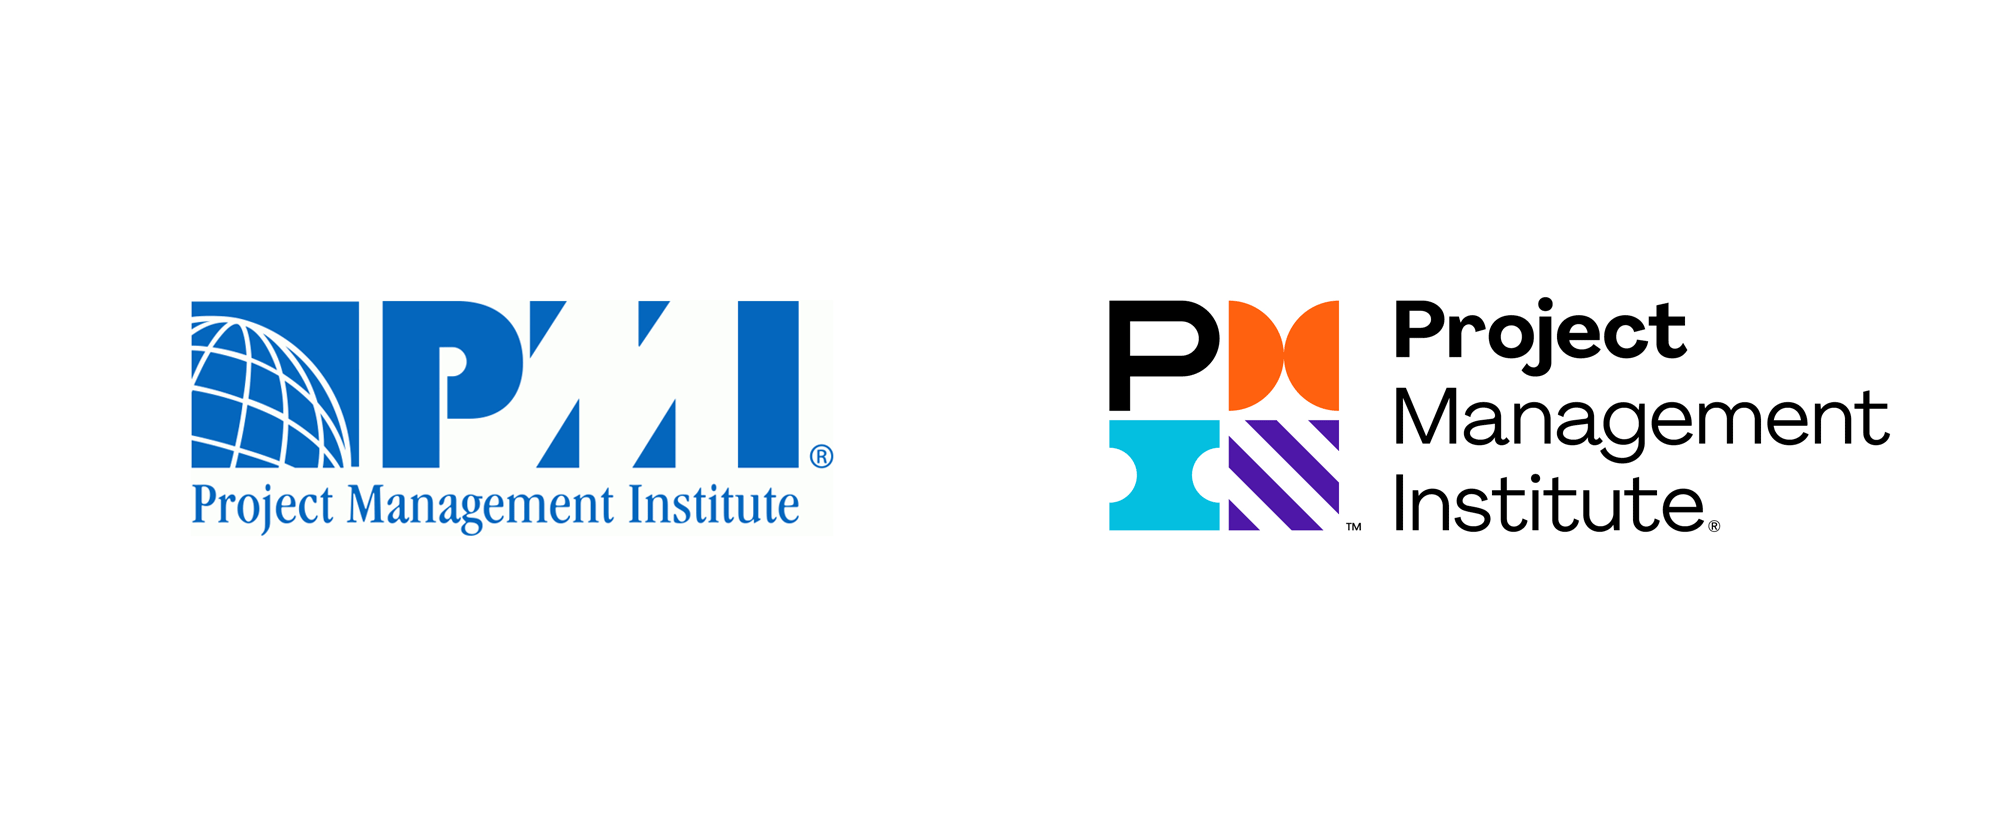 Project Management Company Logos